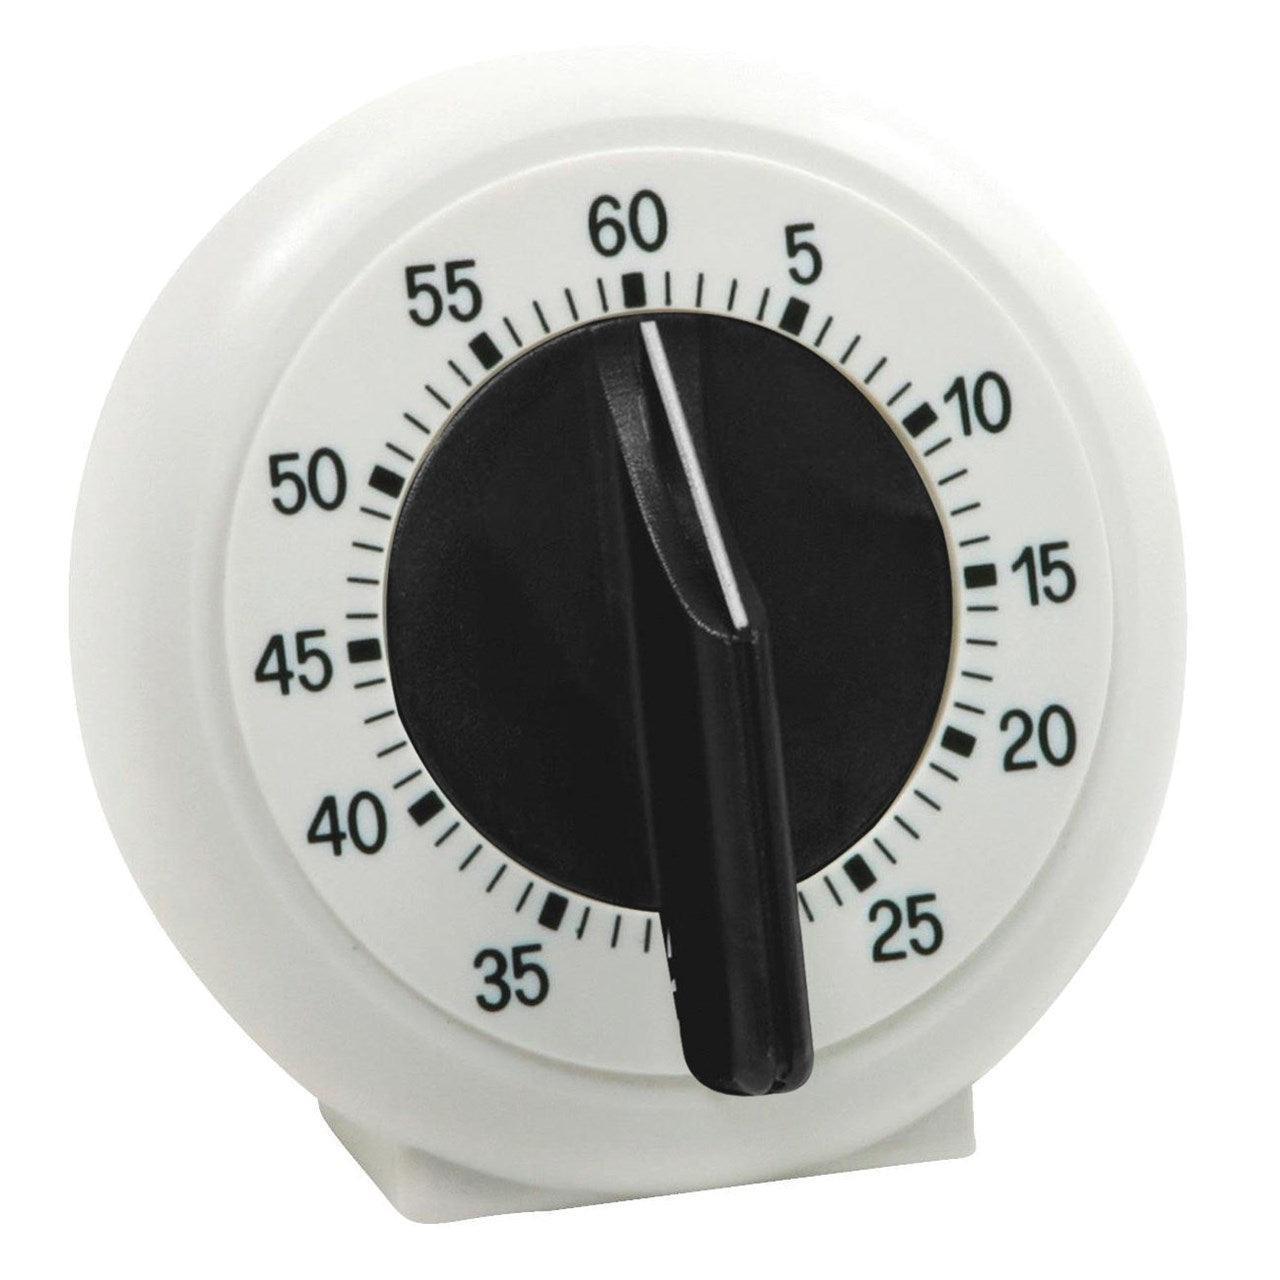 Large-Number Long-Ring Mechanical Timer - The Low Vision Store